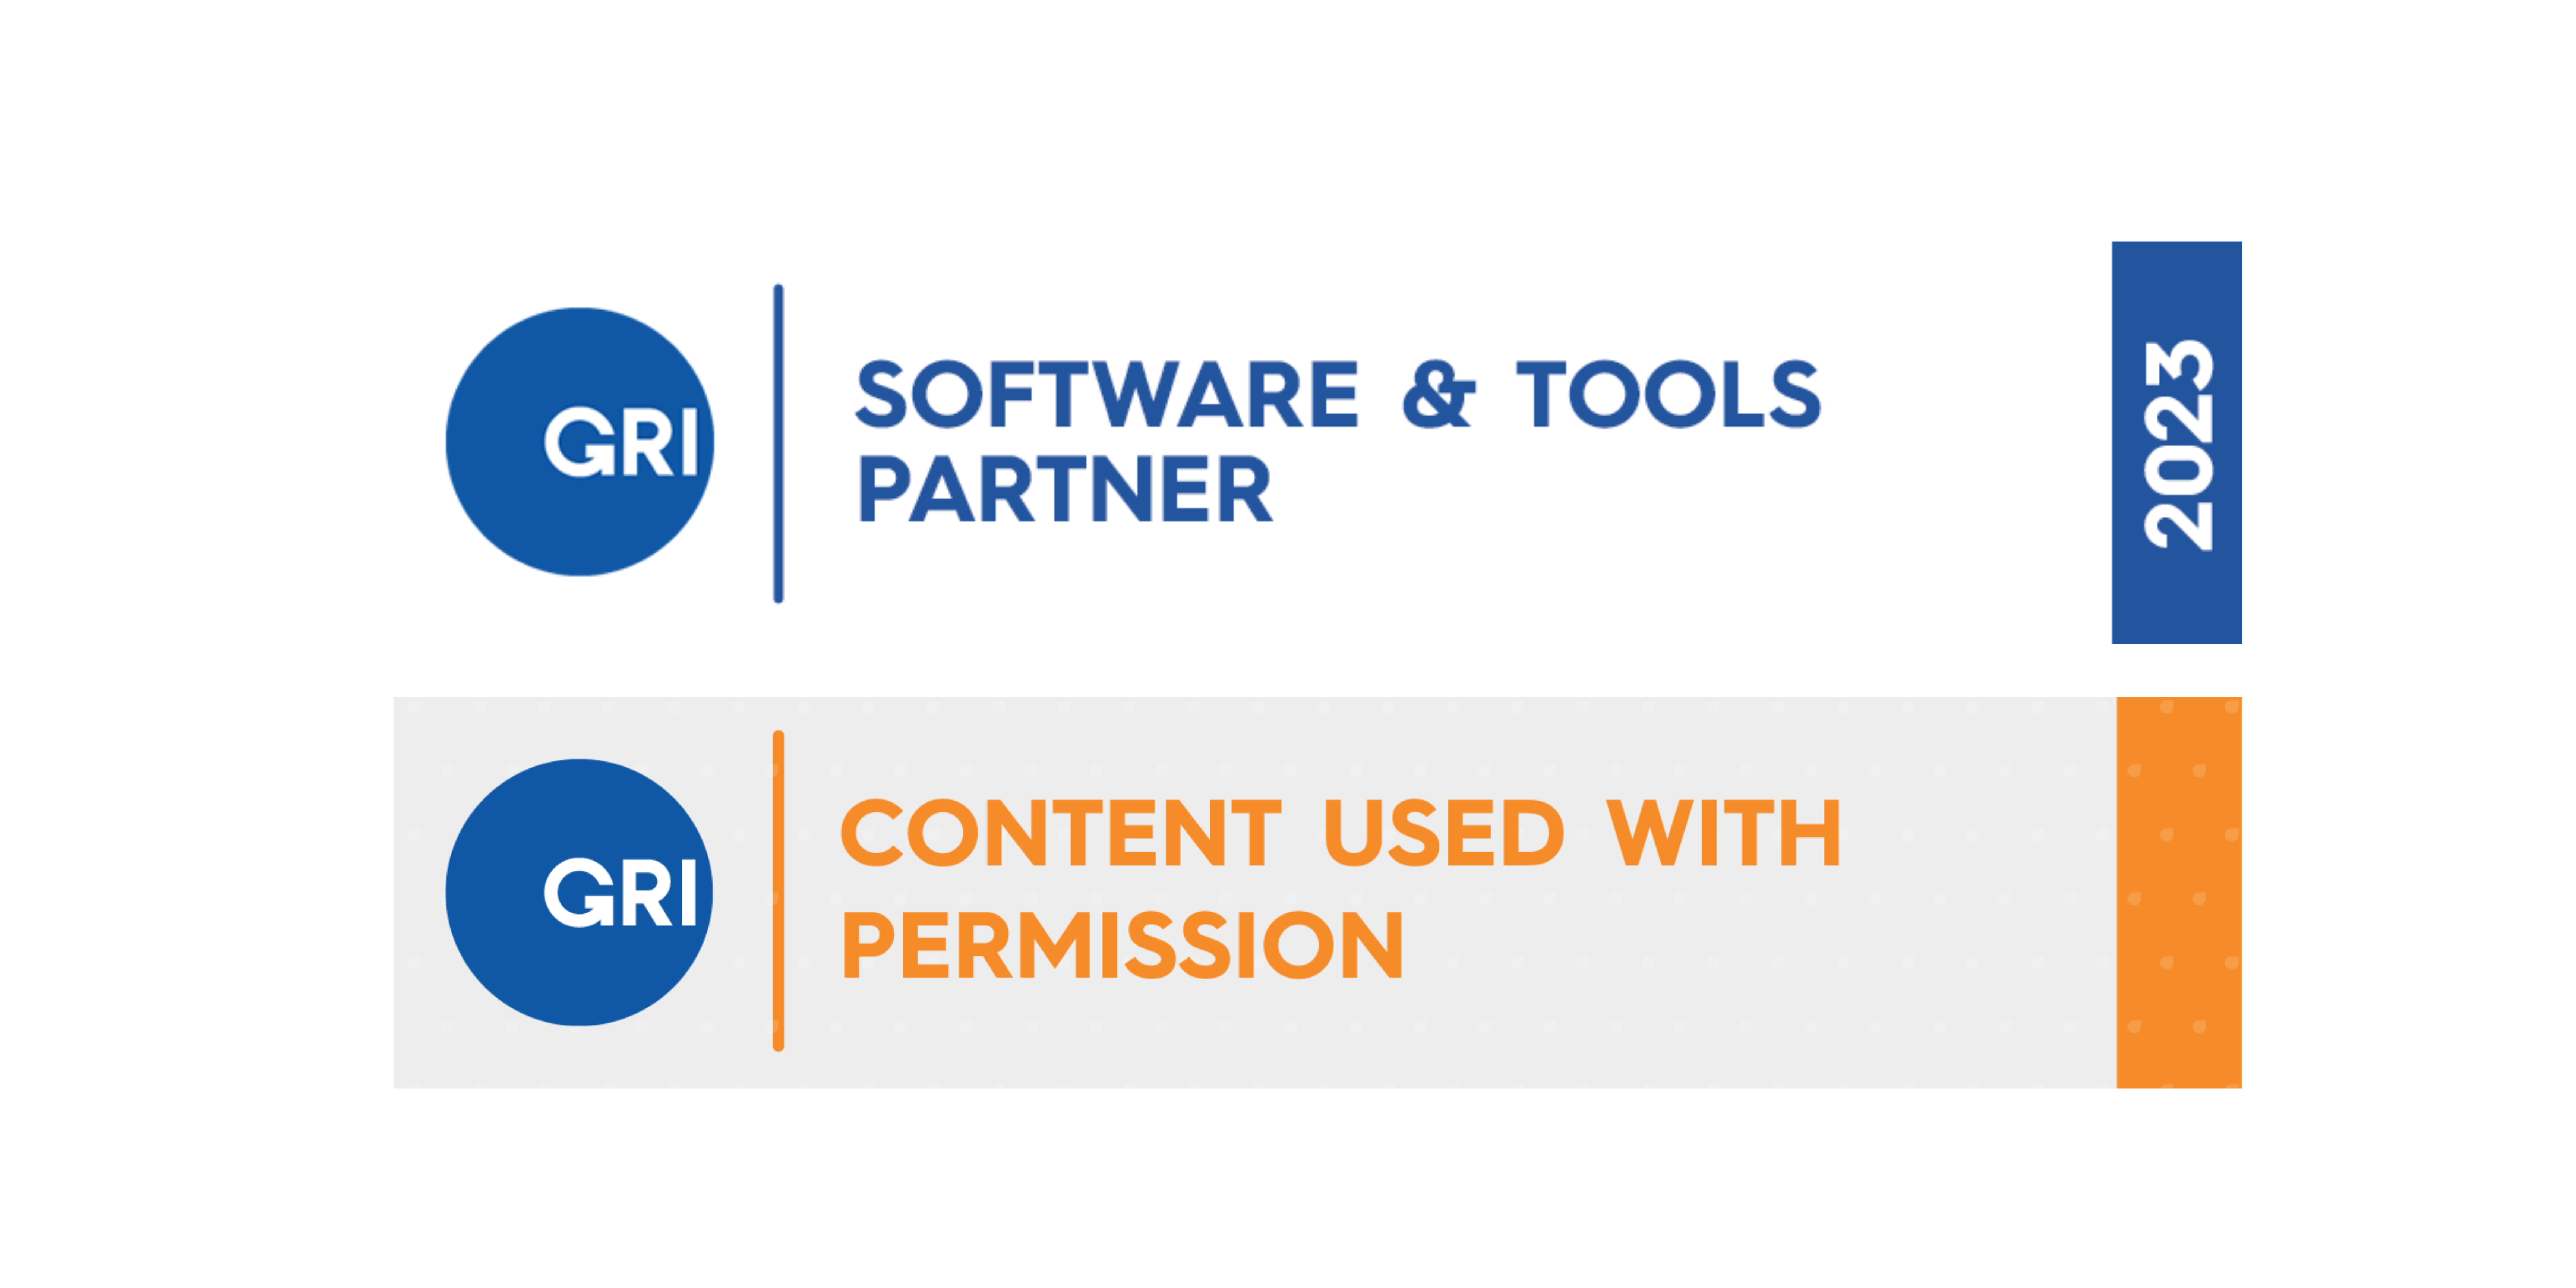 TT GREEN® is now officially Global Reporting Initiative (GRI) Licensed Software and Tools Partner